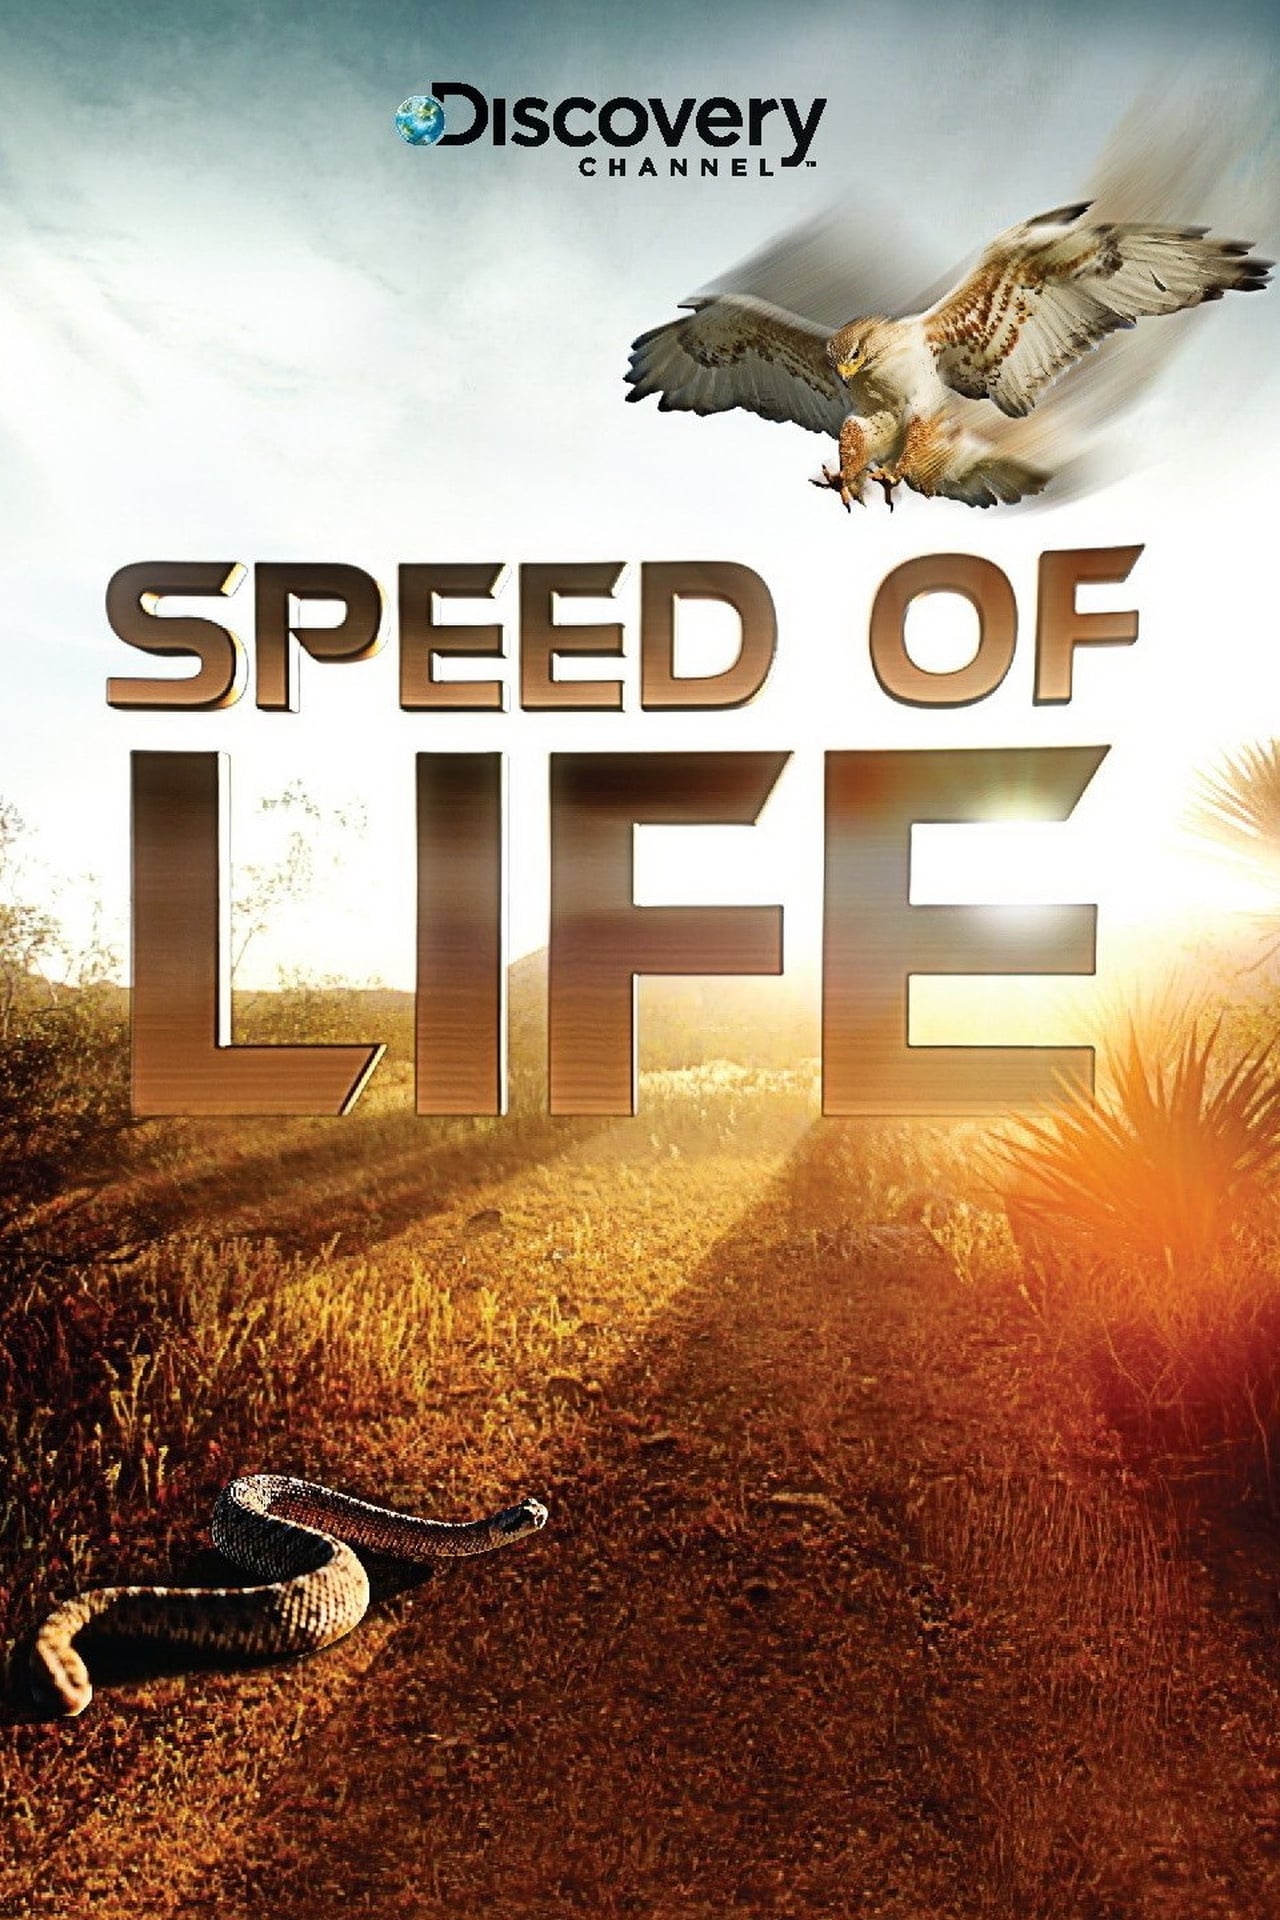 Speed of Life (2010) S1 EP3 Predators of the South West 448Kbps 25Fps 48Khz 2.0Ch BluRay Turkish Audio TAC